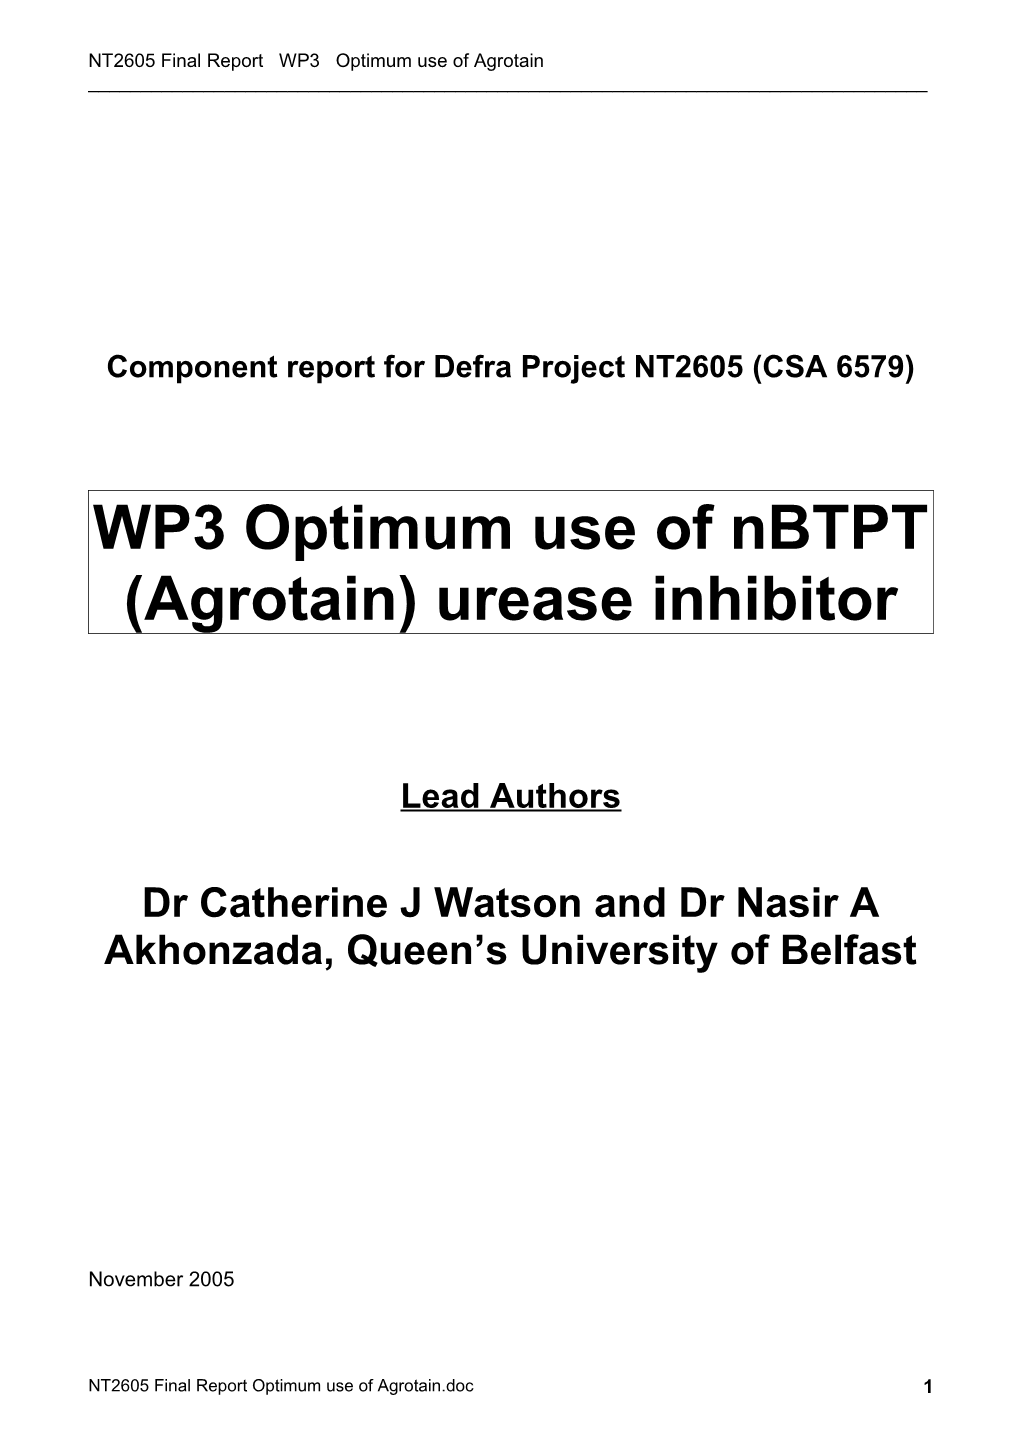 Report for Defra Project NT2601